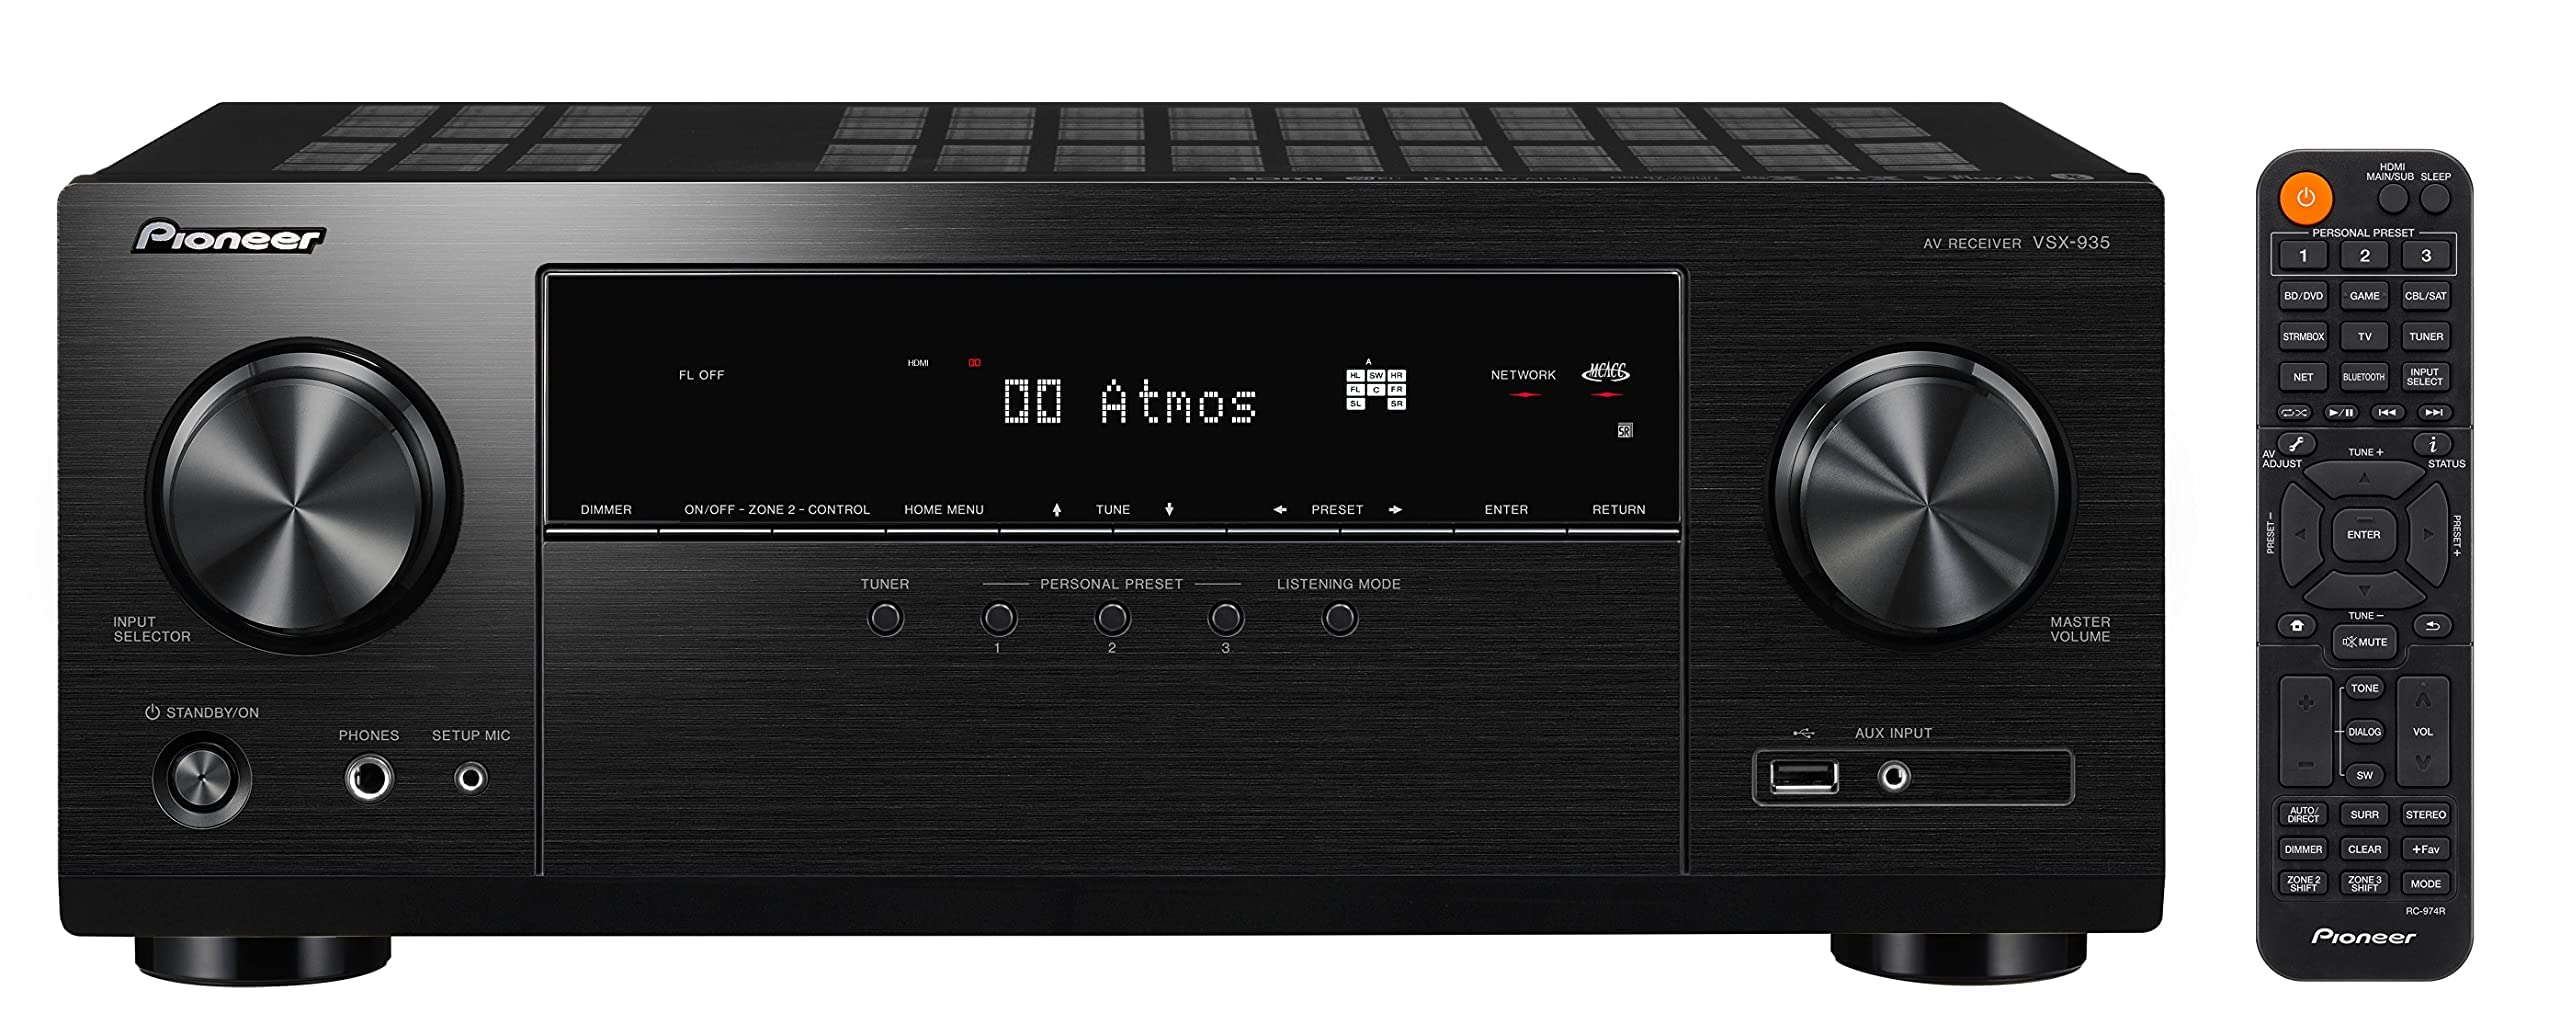 Pioneer introduces the 7.2 Channel Network AV Receiver